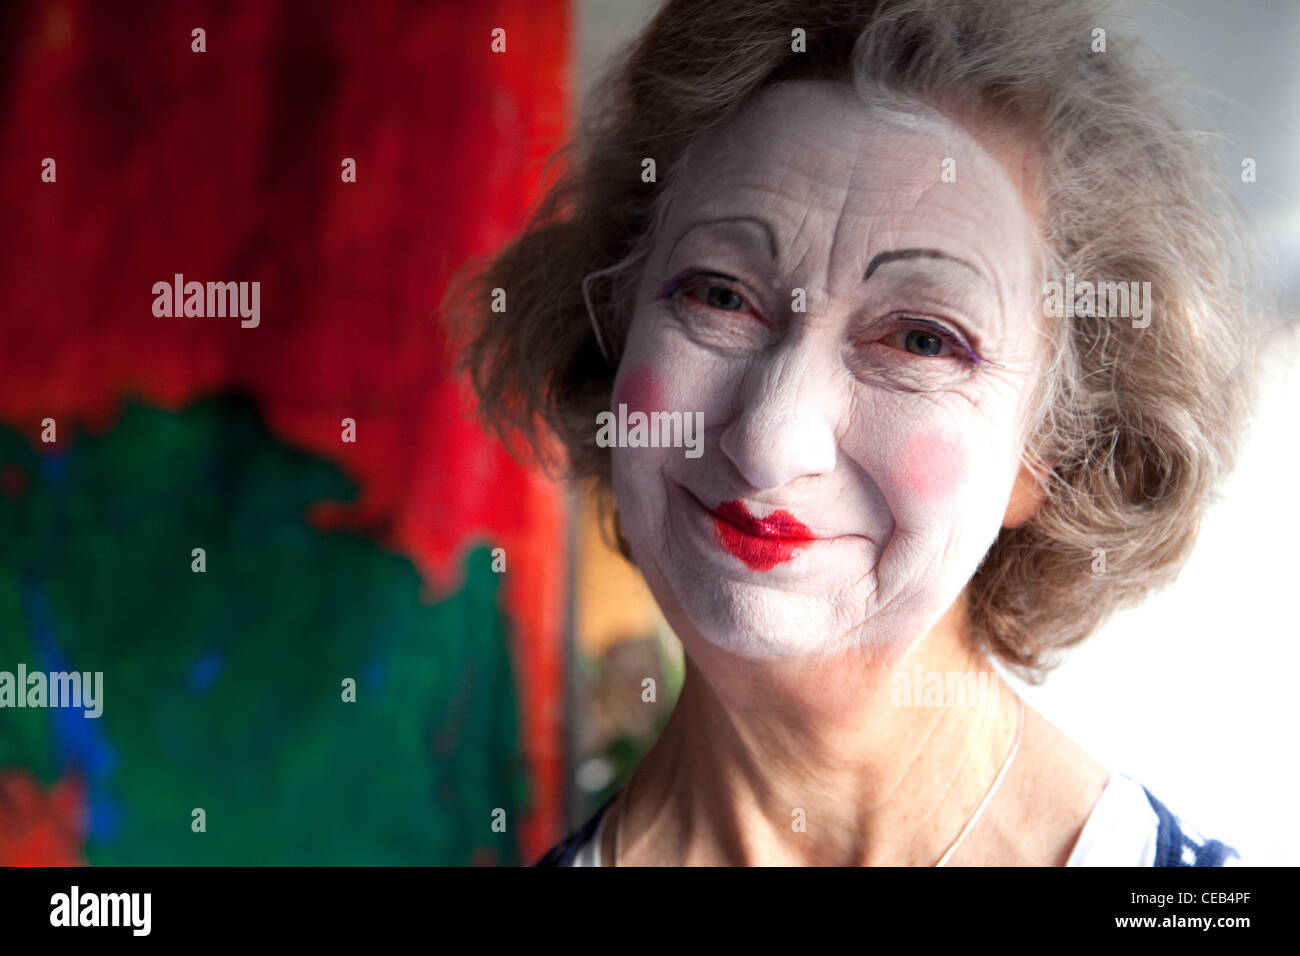 Elderly woman smiles to camera, wearing whiteface clown make-up Stock Photo